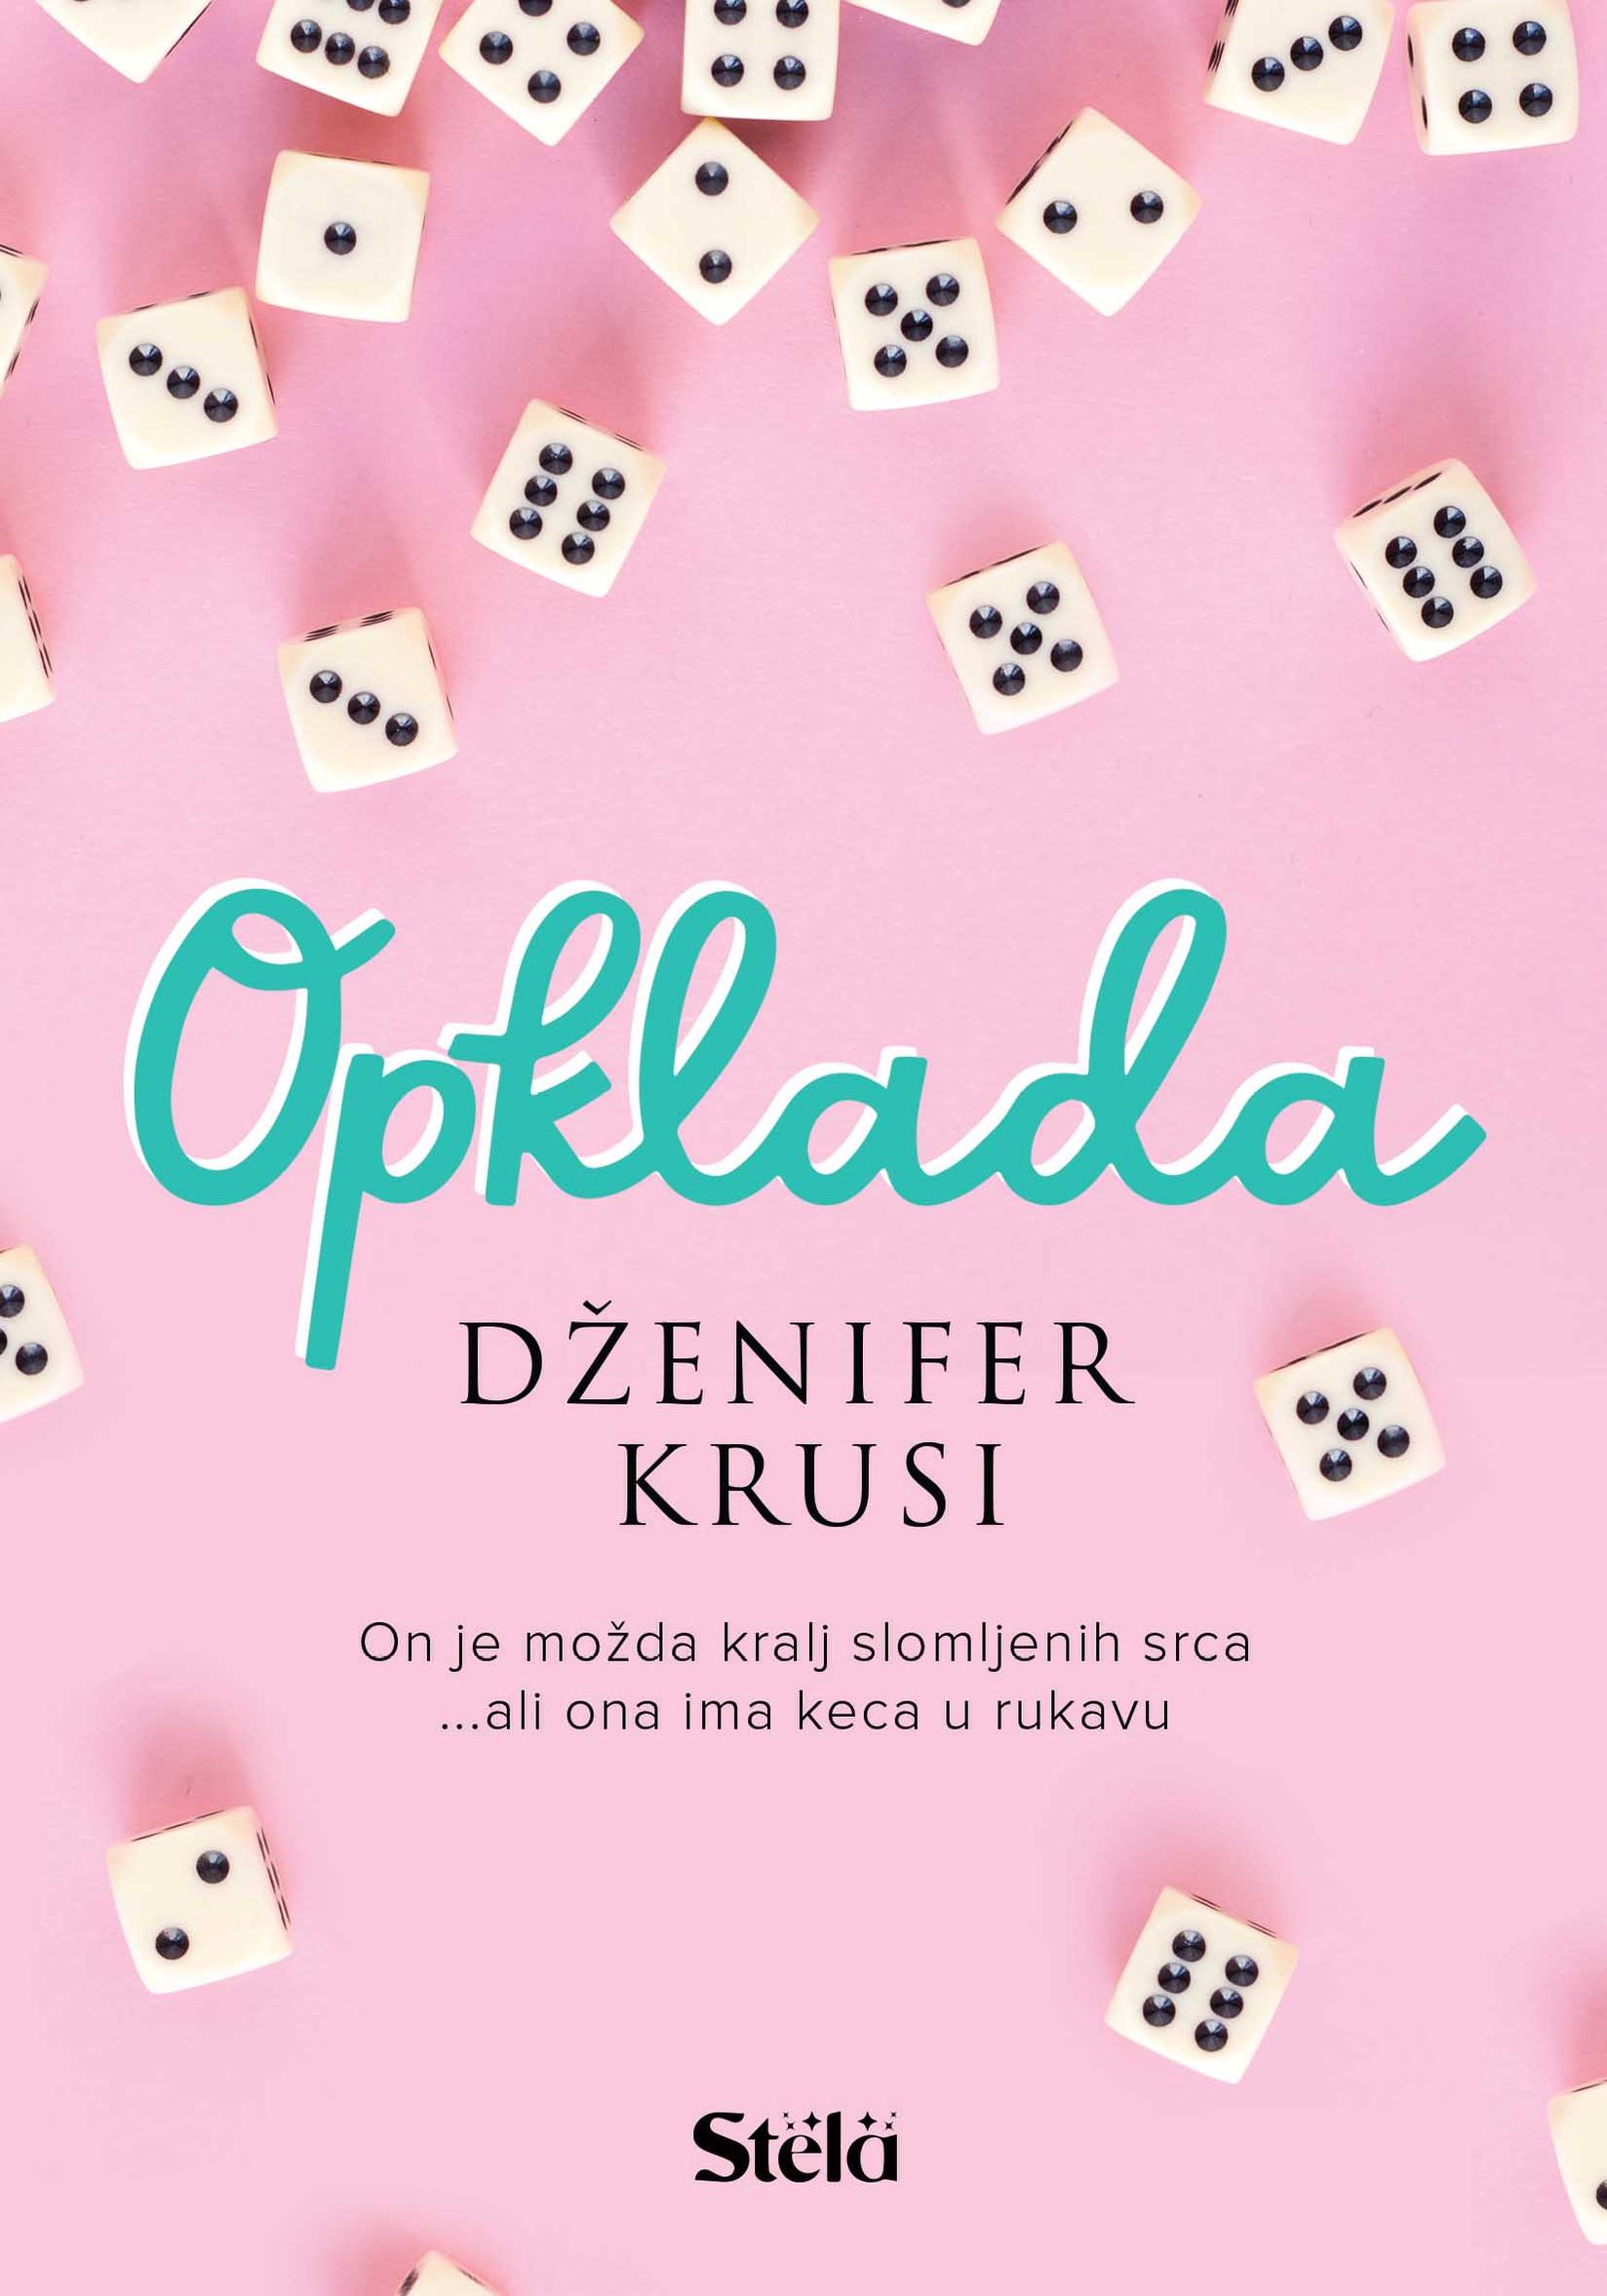 Selected image for Opklada